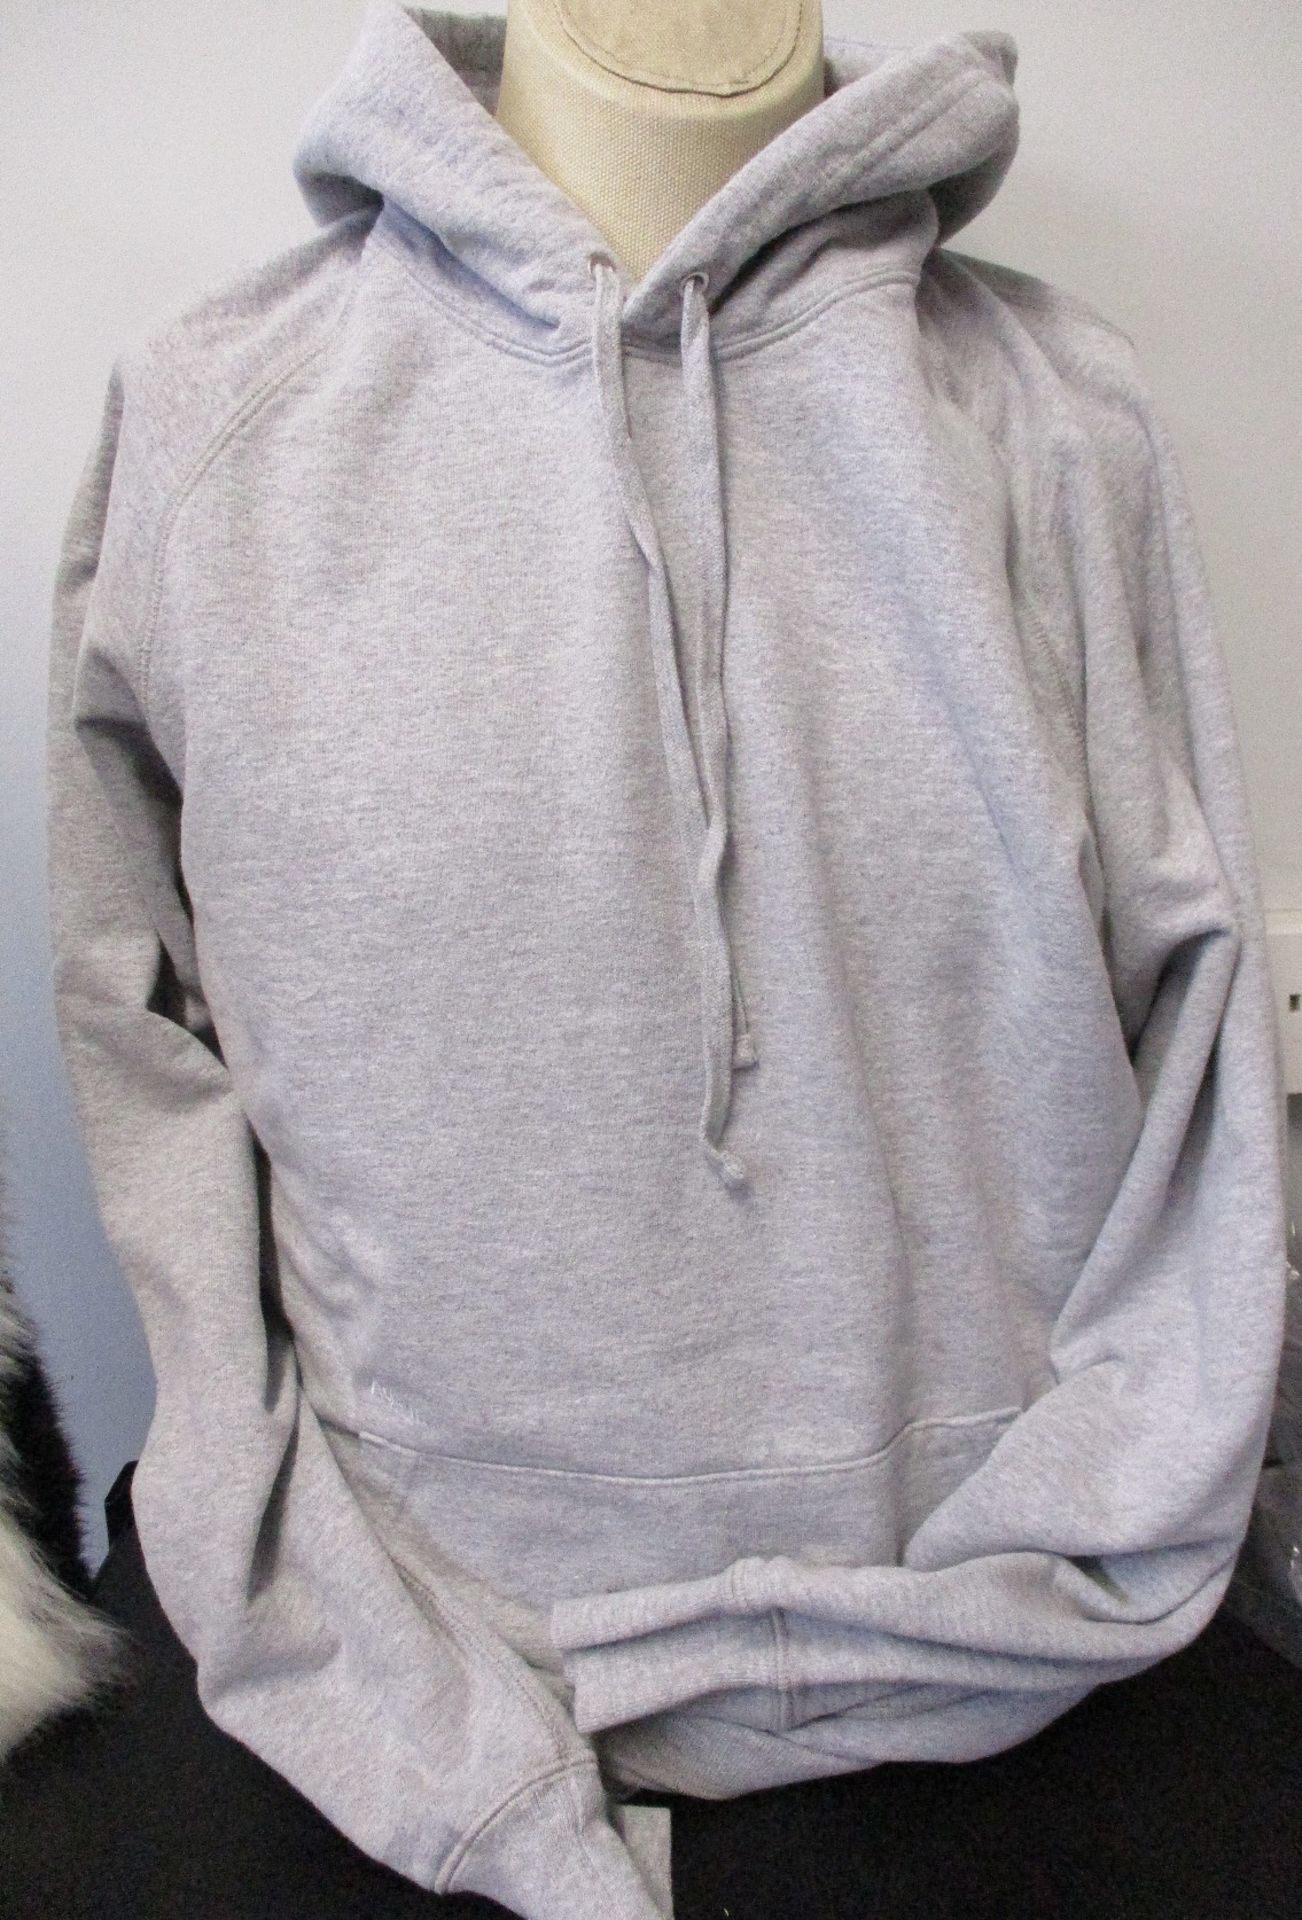 Two as new Adsum Classic Logo hoodies in ash heather grey (L - RRP £95 each).